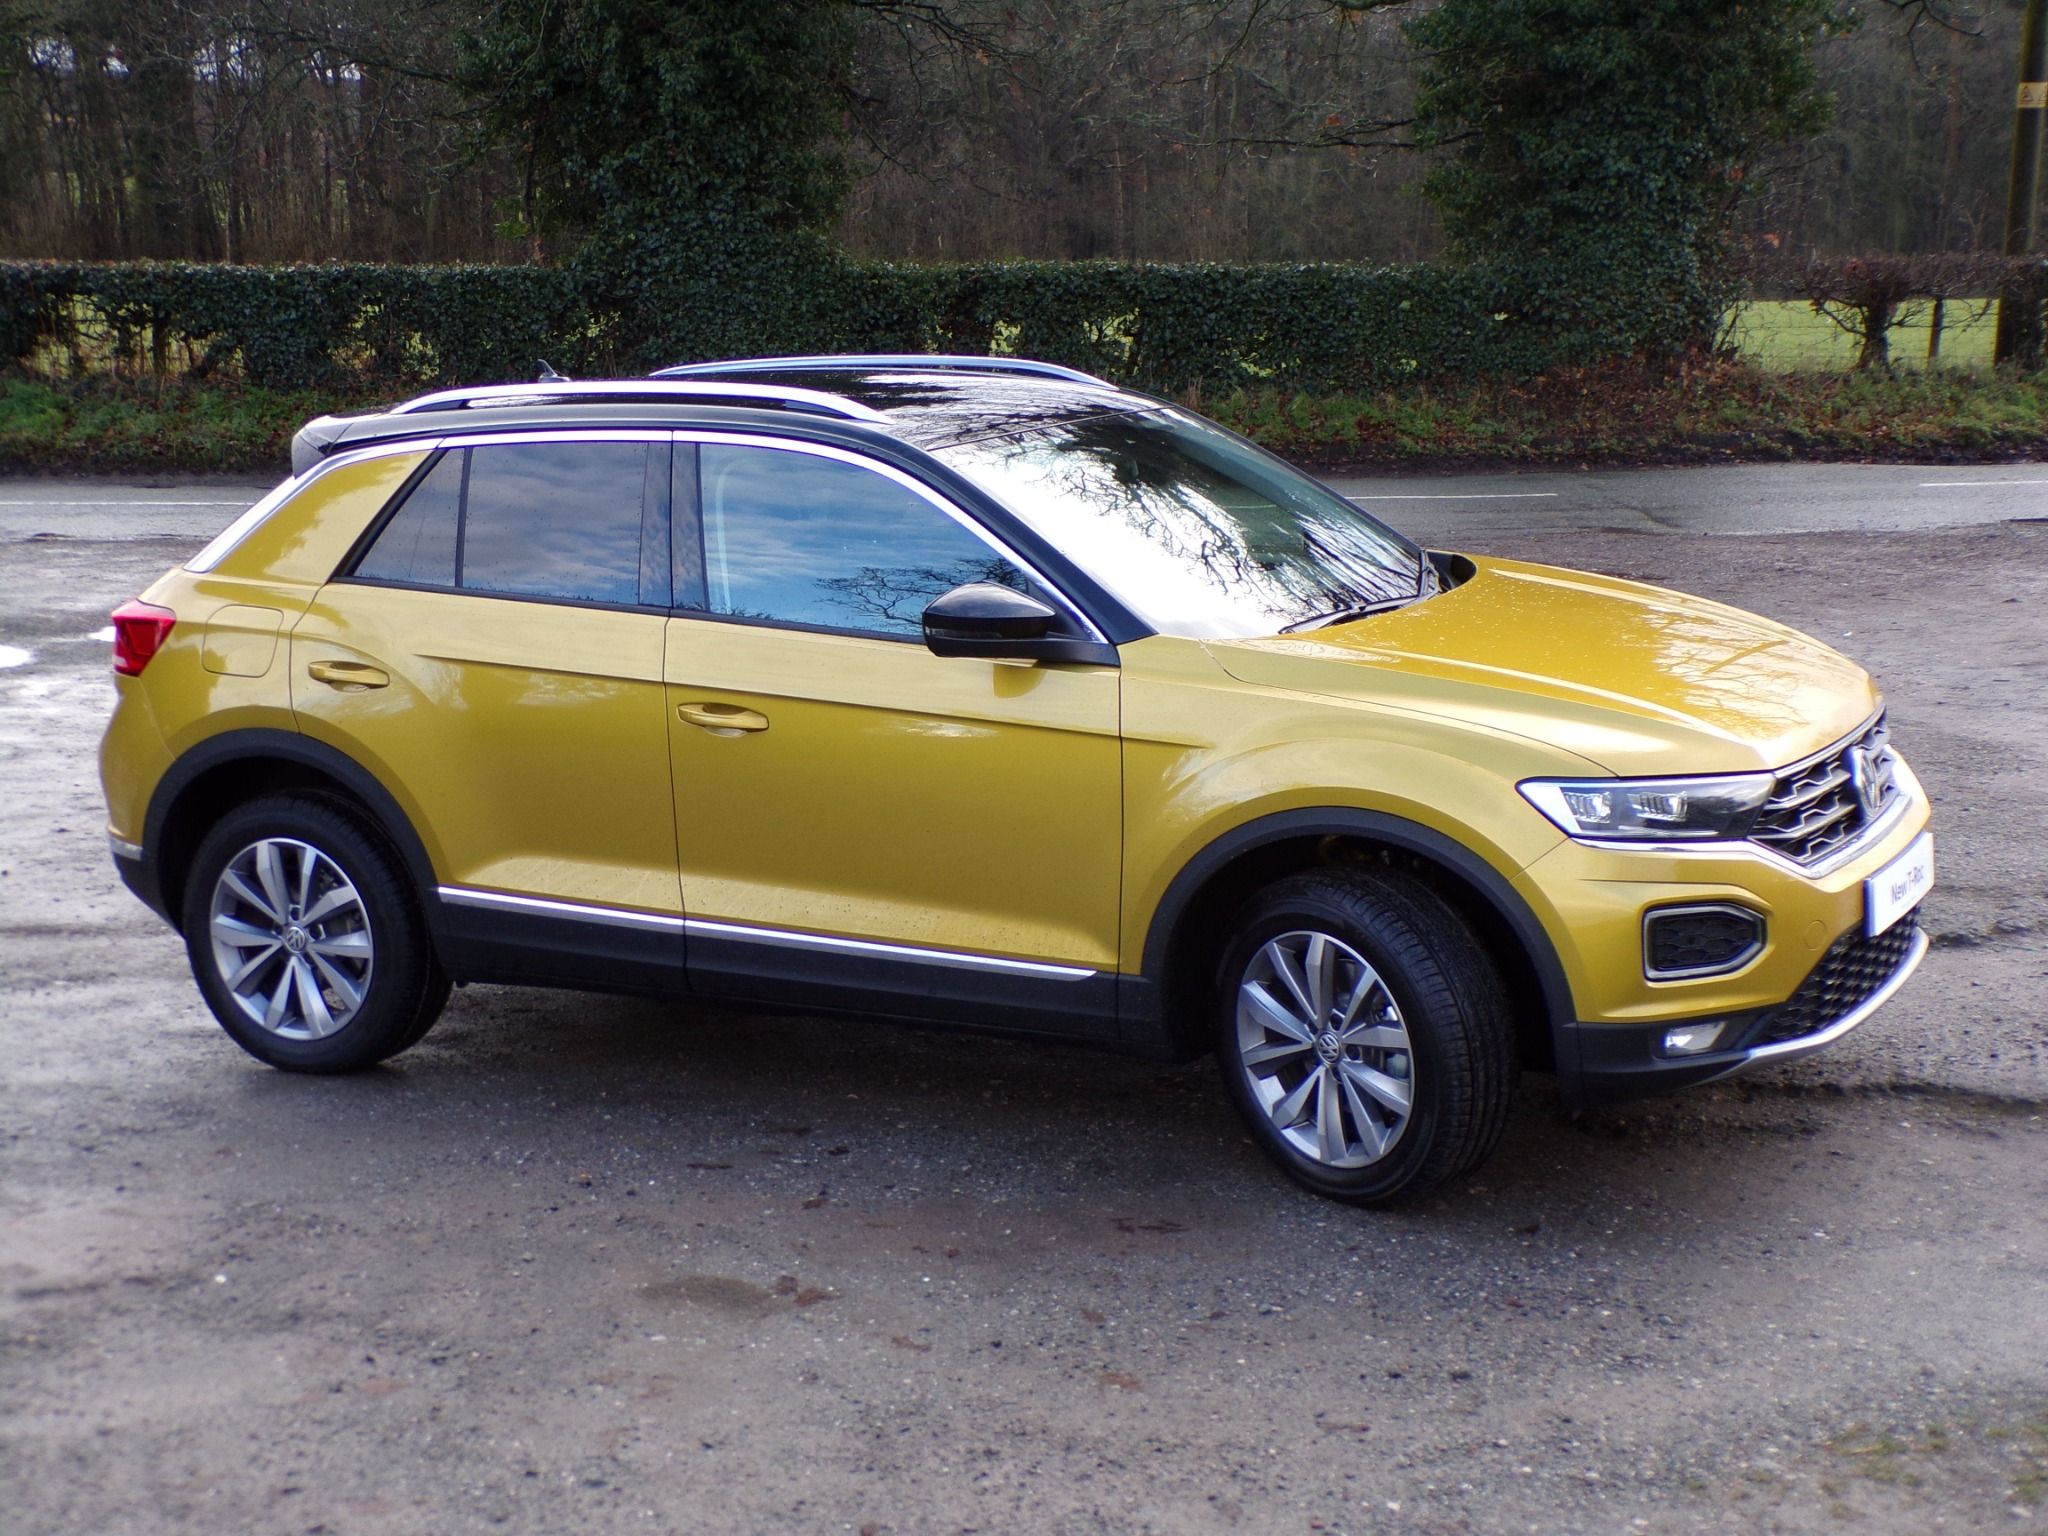 A driver's delight, the Volkswagen T-Roc defines affordable luxury